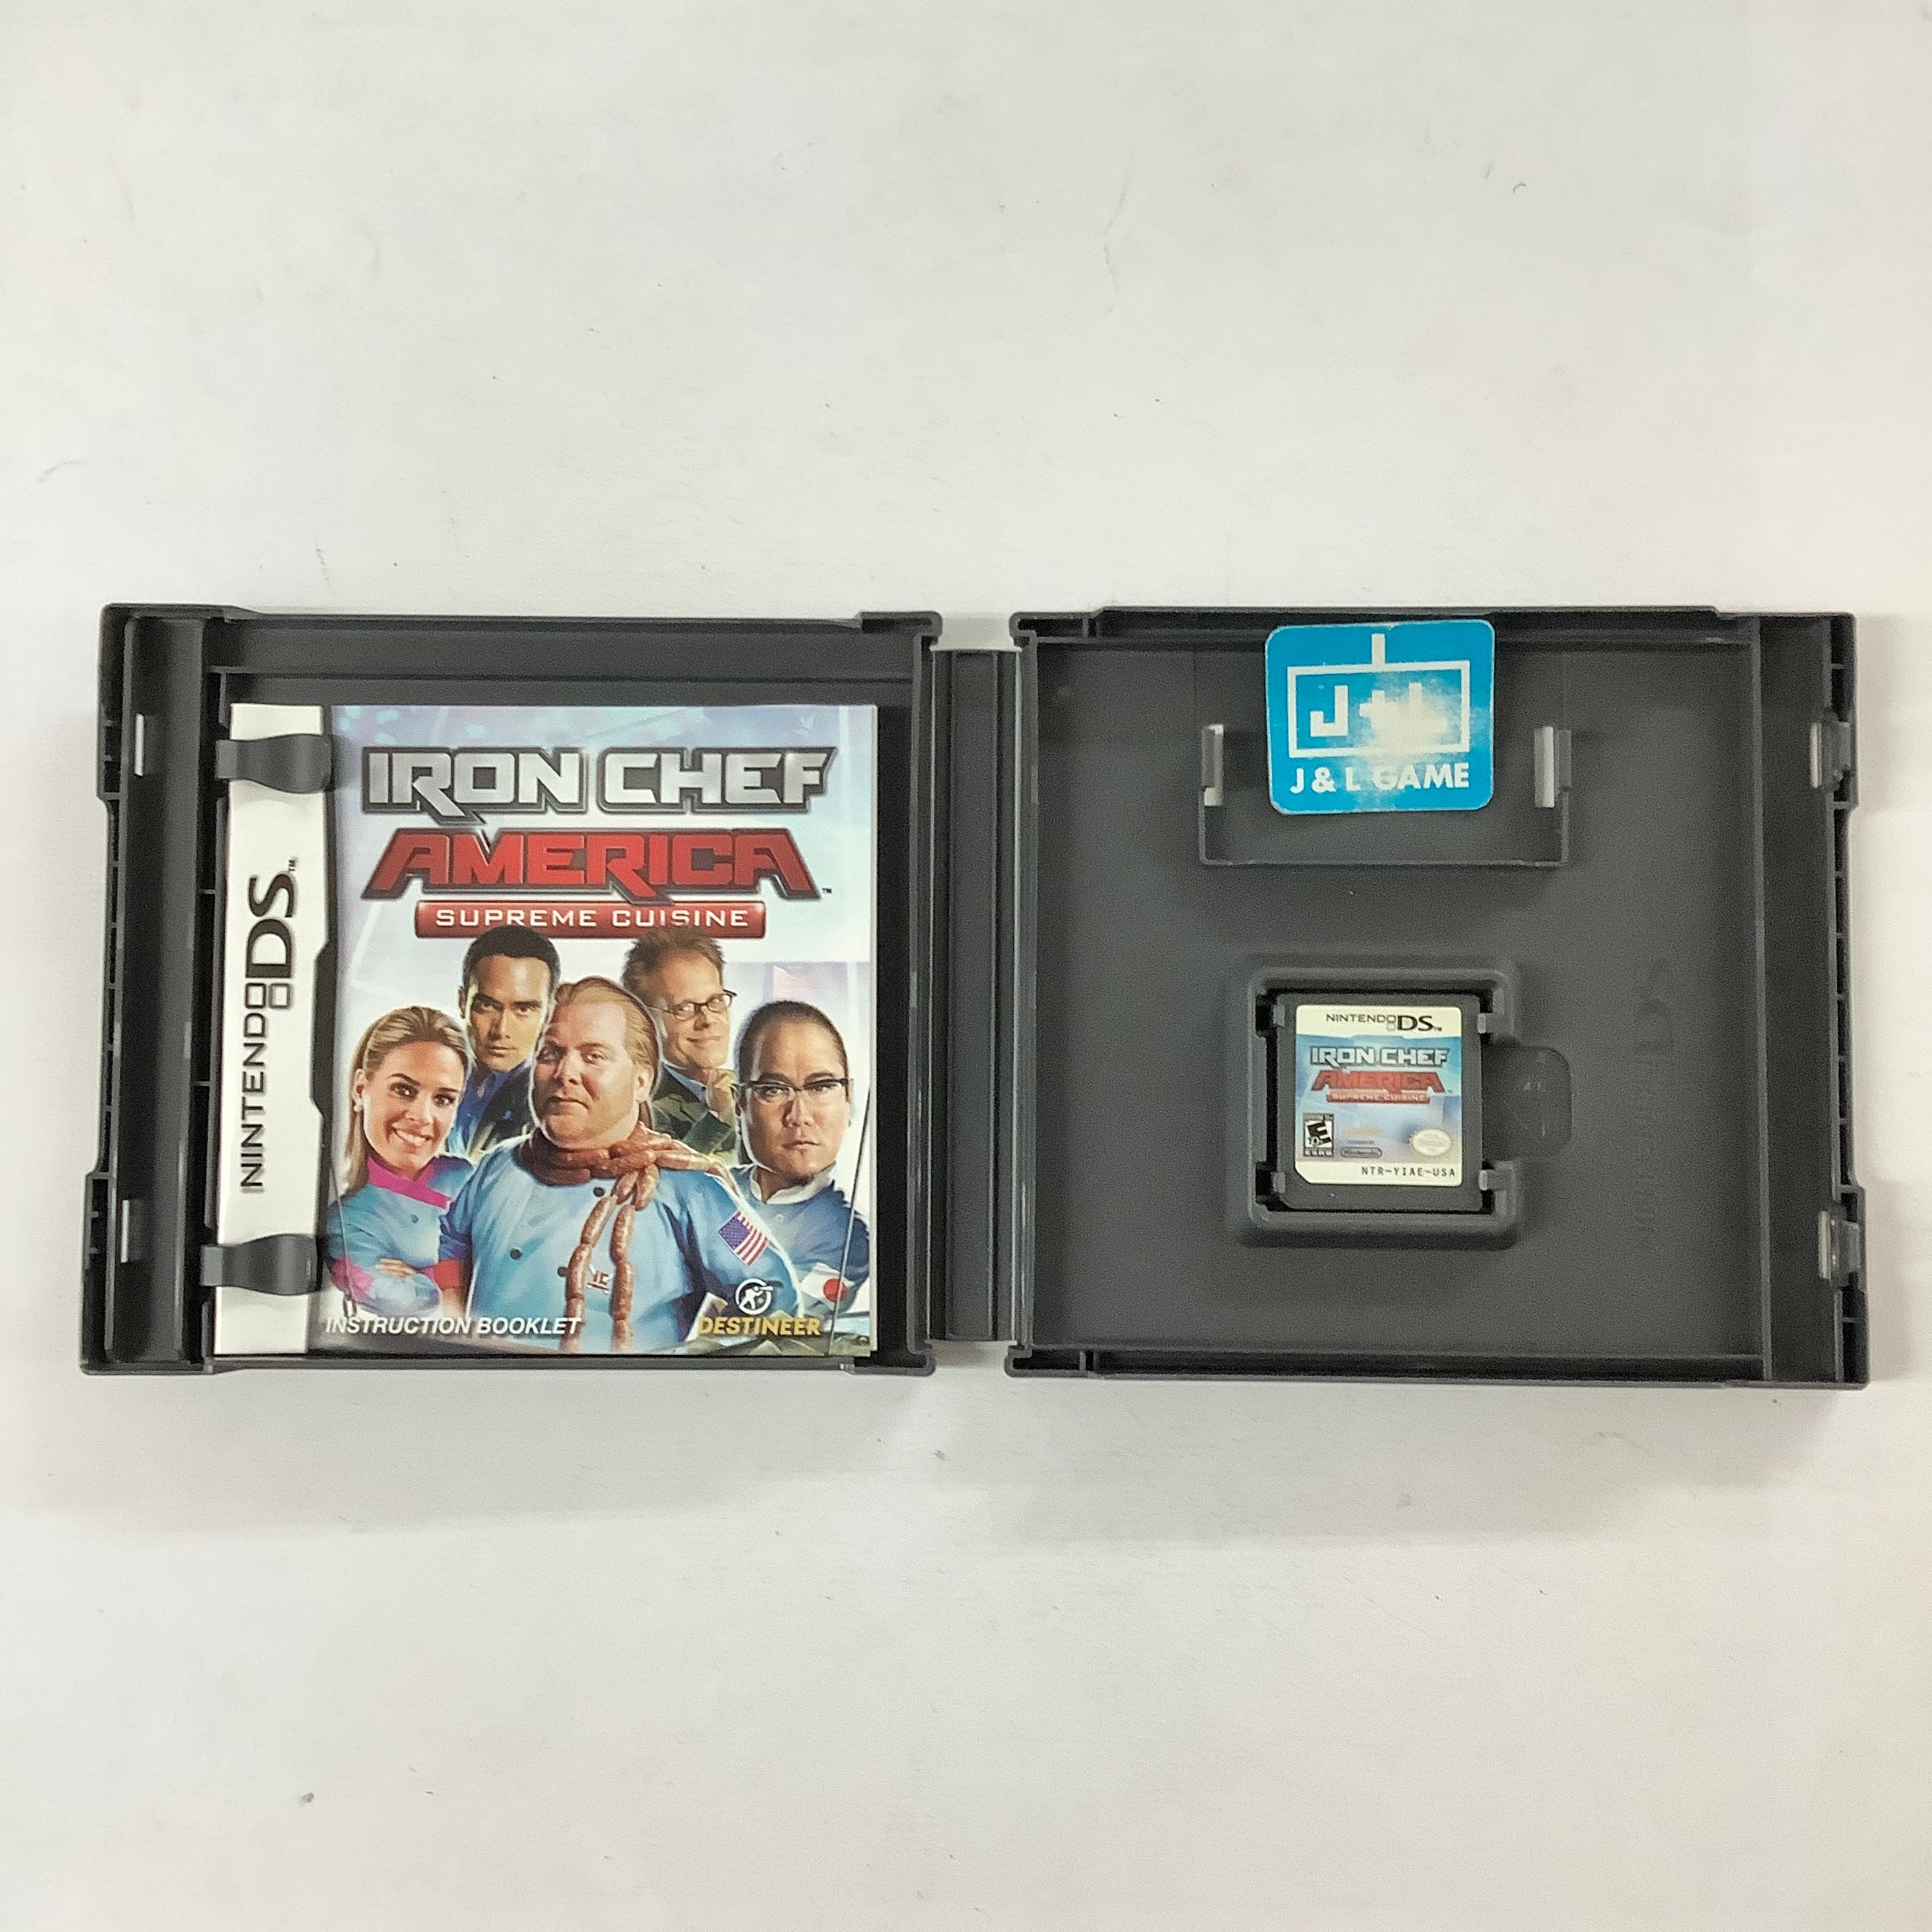 Iron Chef America: Supreme Cuisine - (NDS) Nintendo DS [Pre-Owned] Video Games Destineer   